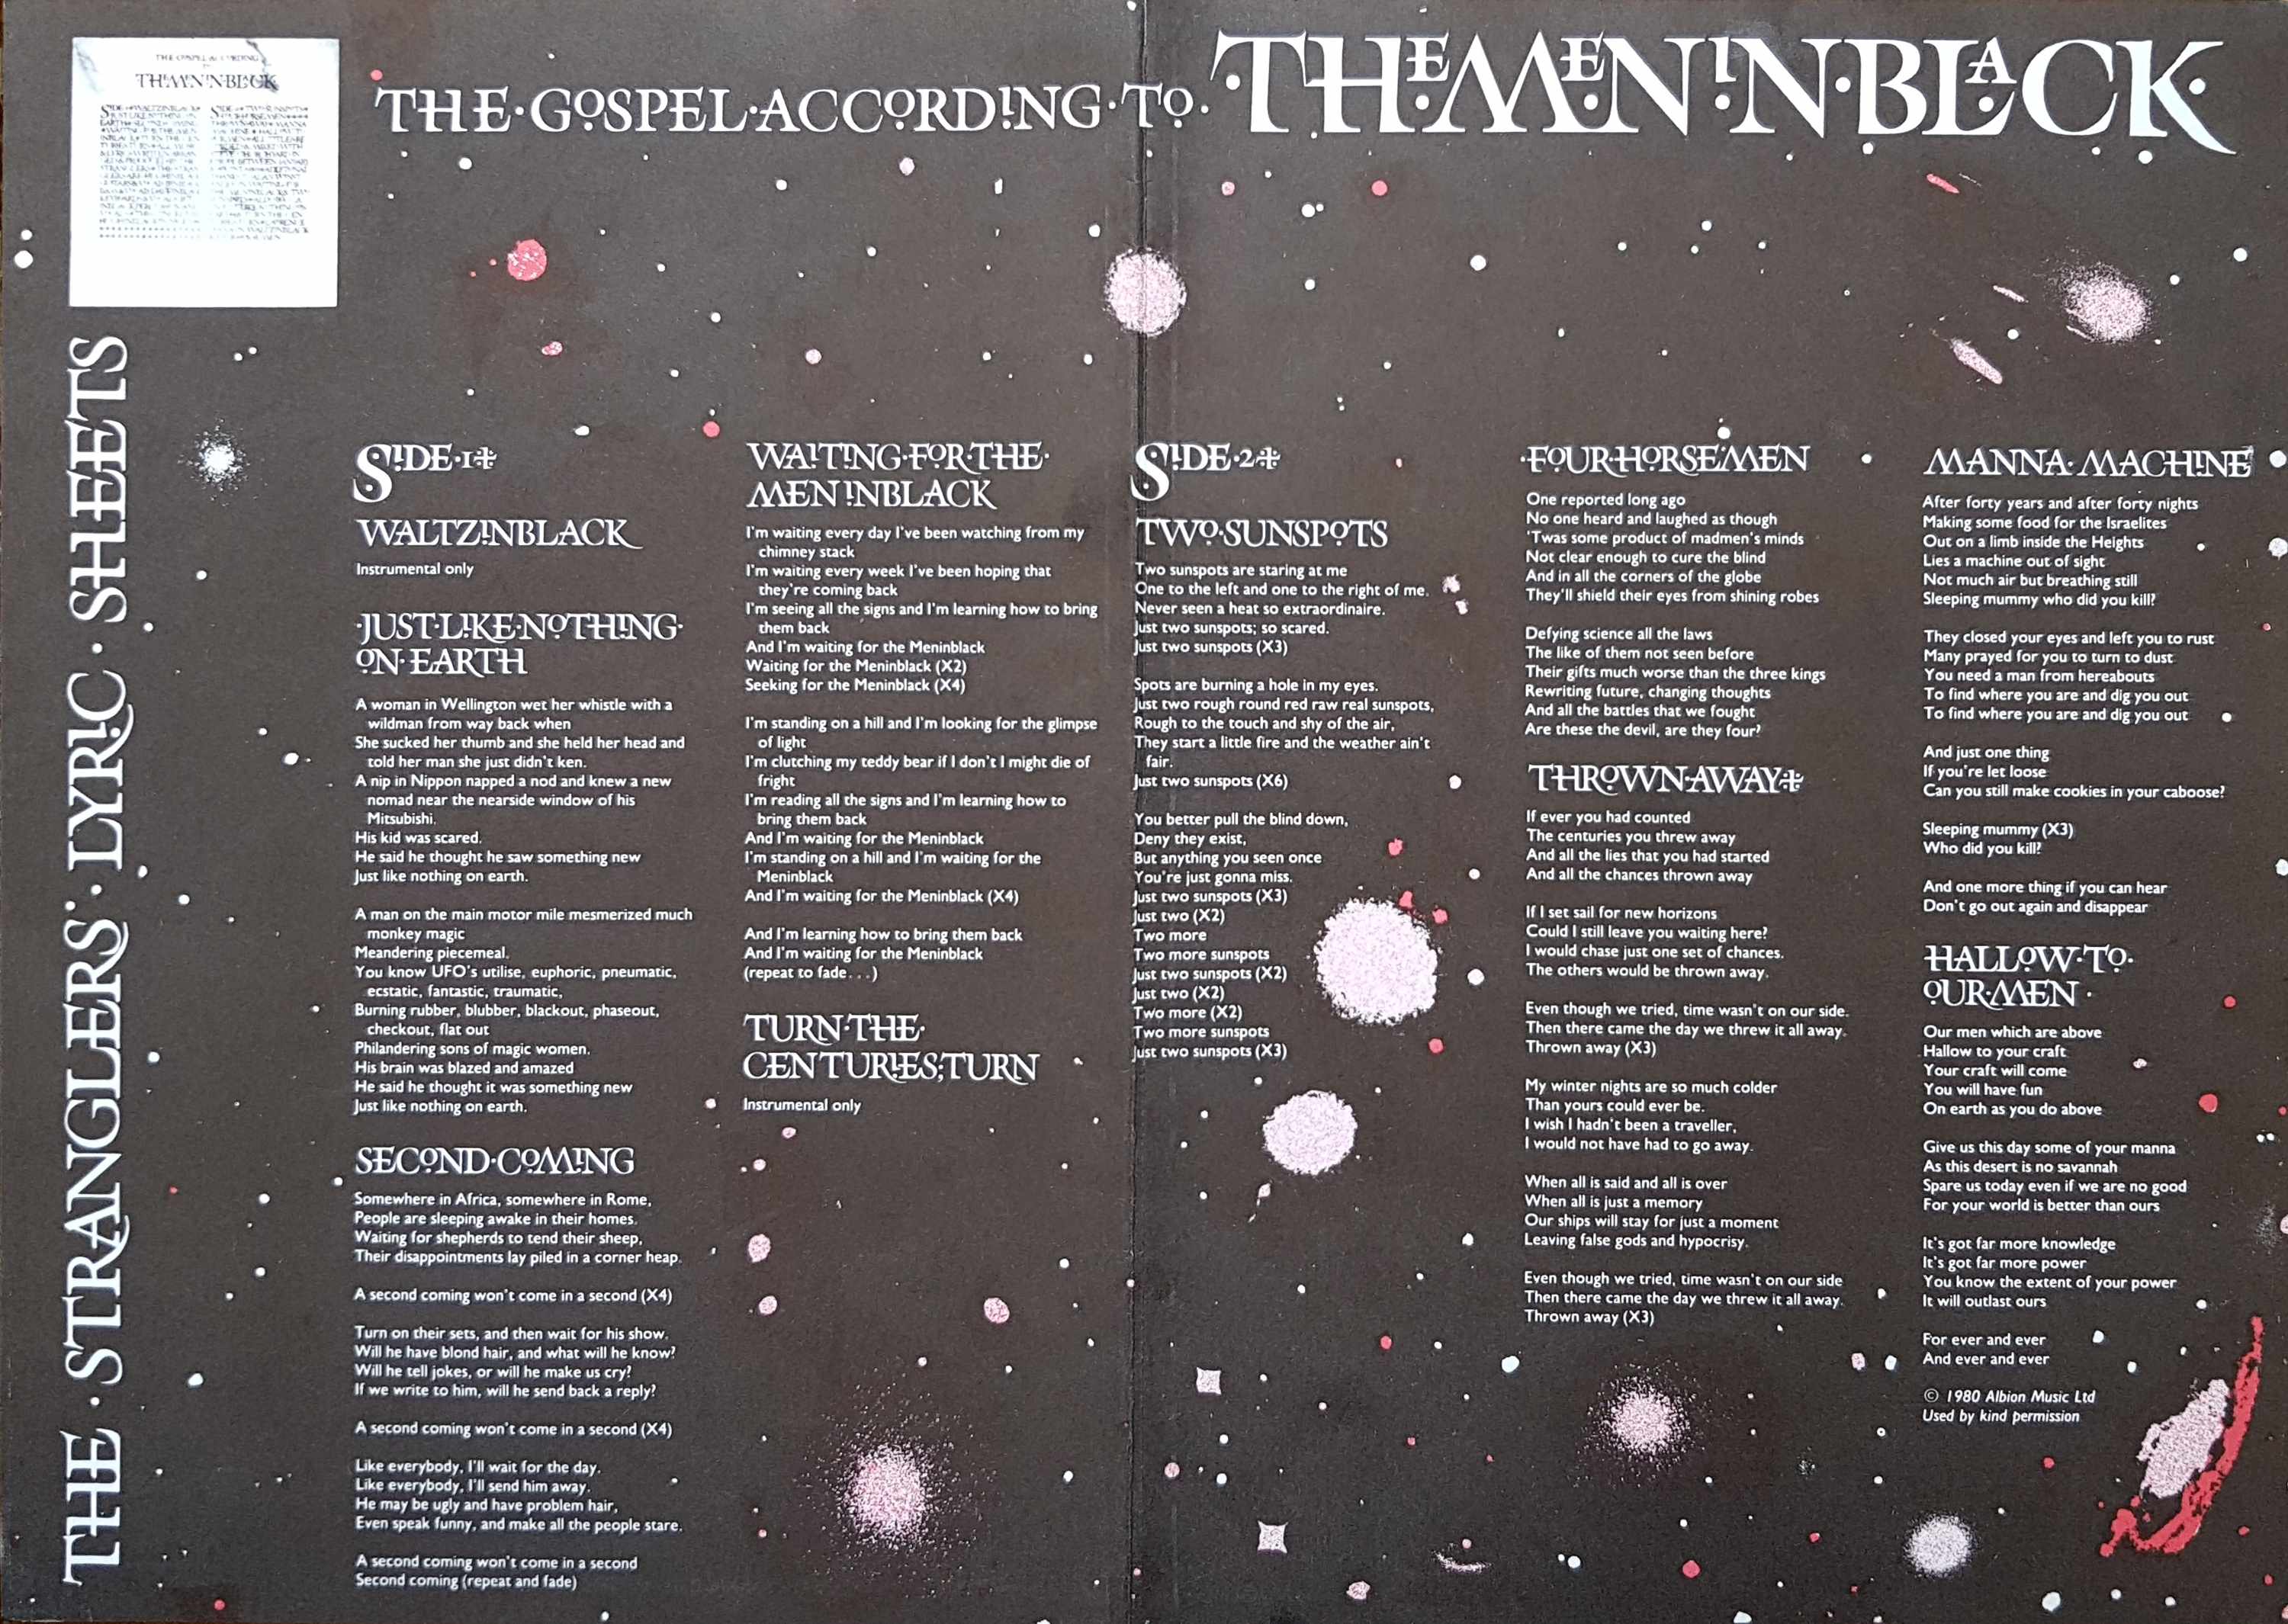 Picture of TGATTLYCSH The gospel according to themeninblack lyric sheets by artist The Stranglers  from The Stranglers